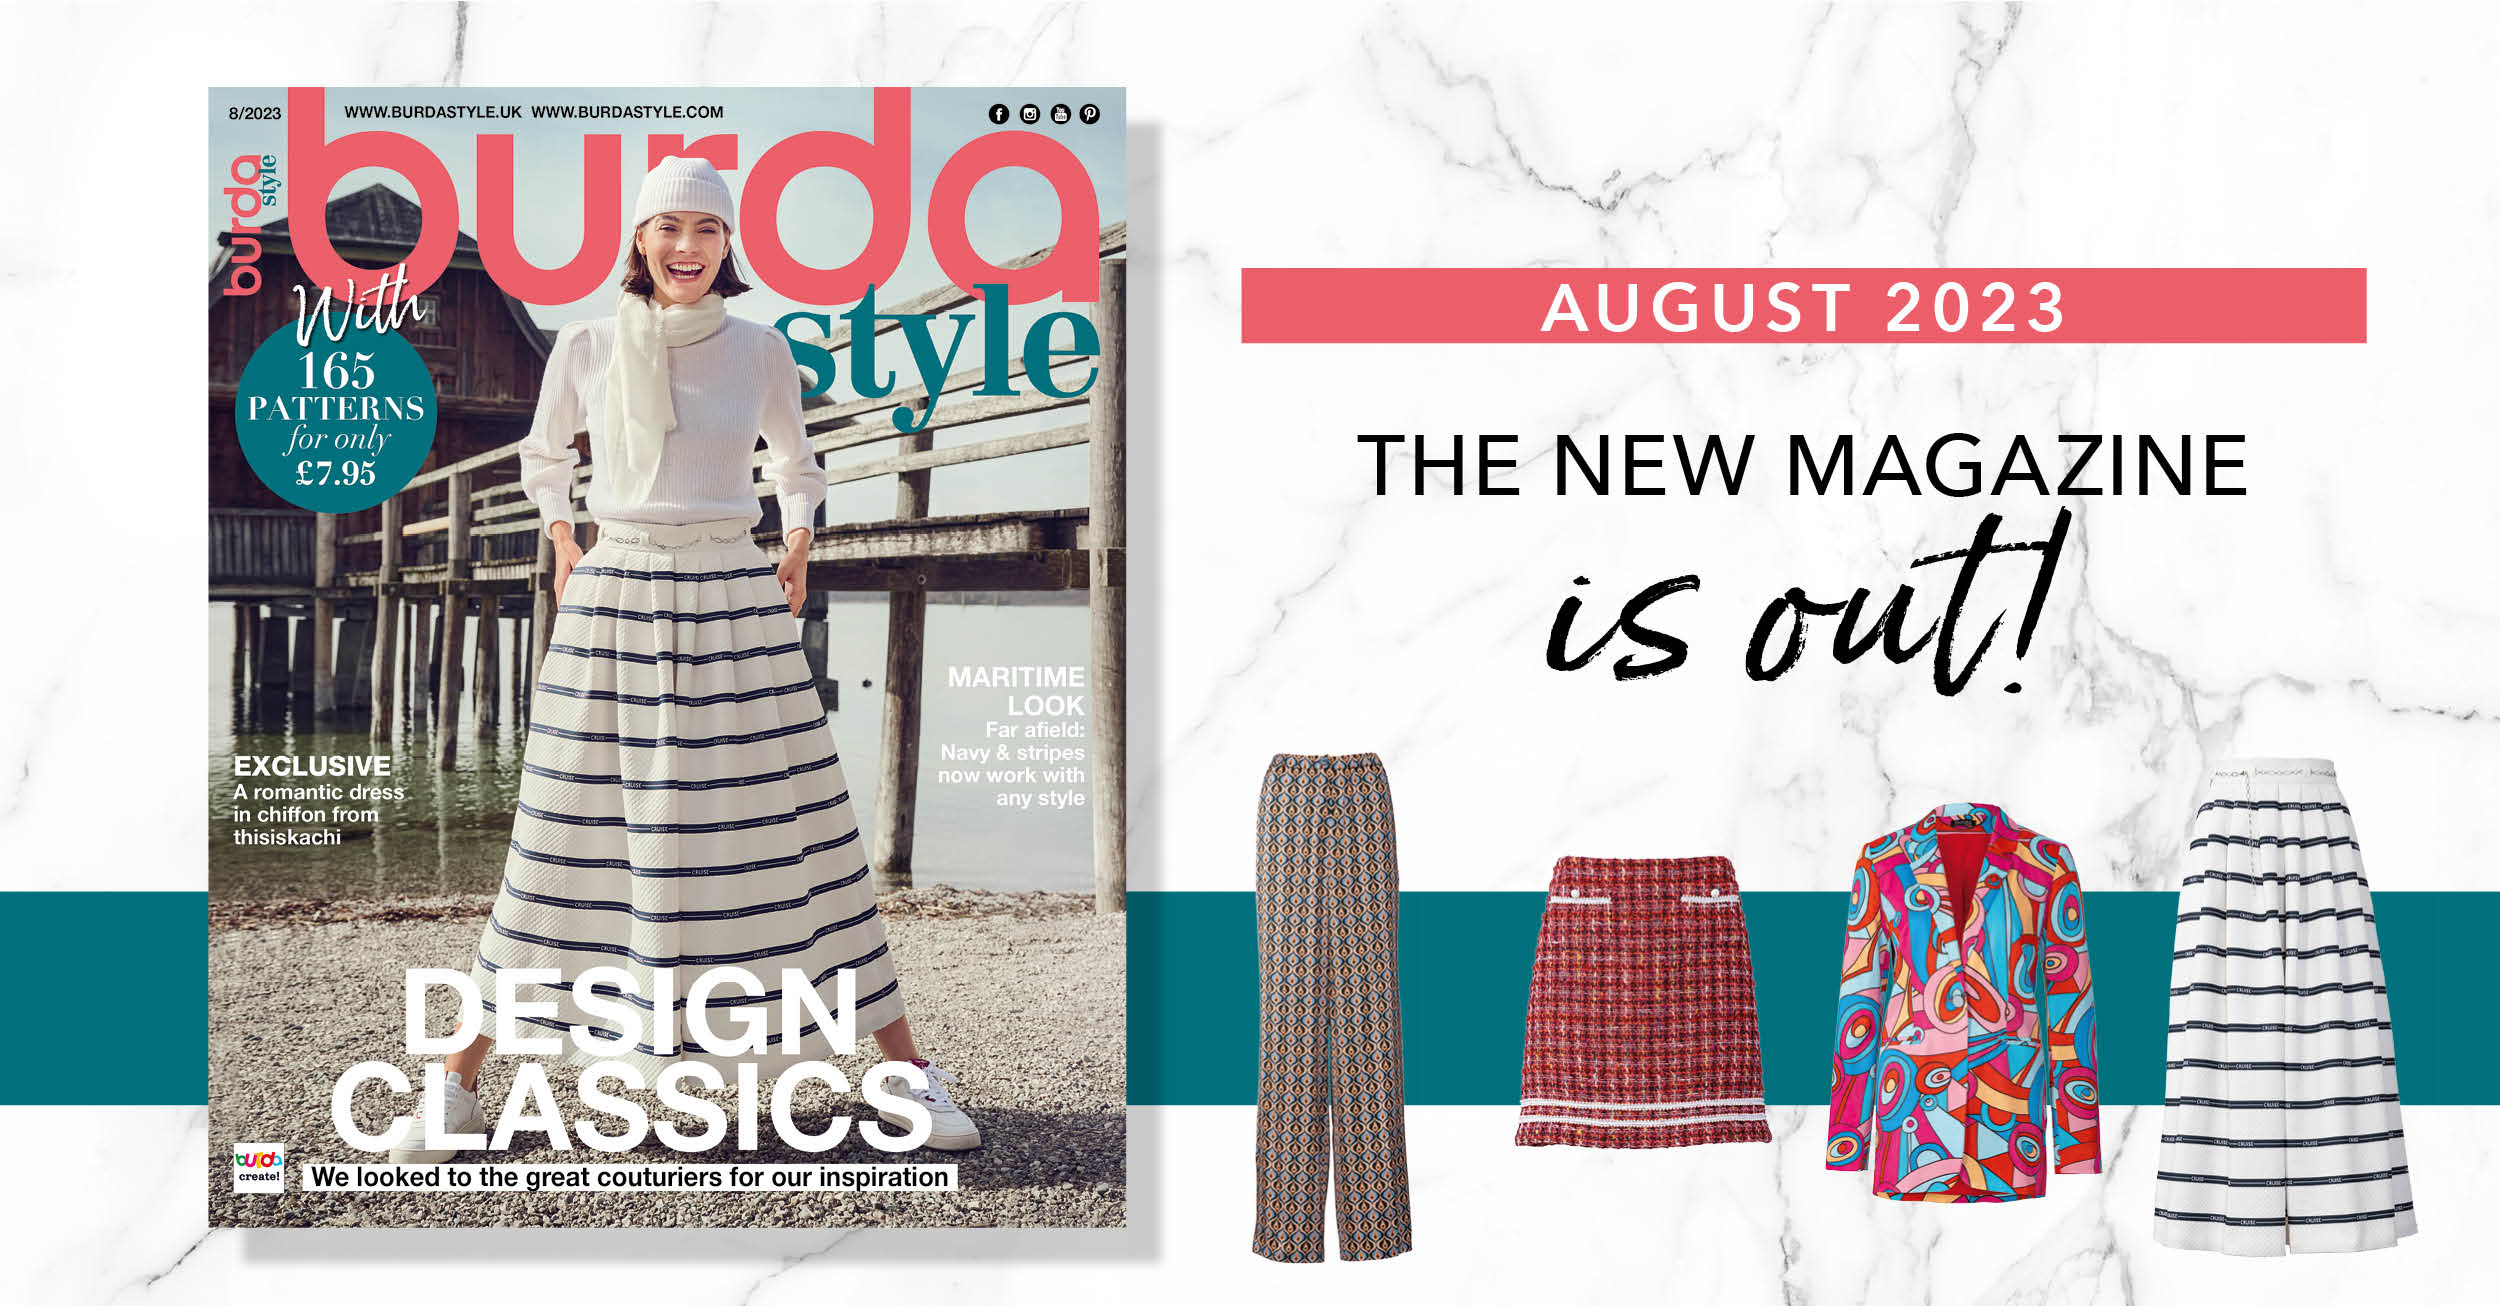 August 2023: The New Issue of Burda Style!